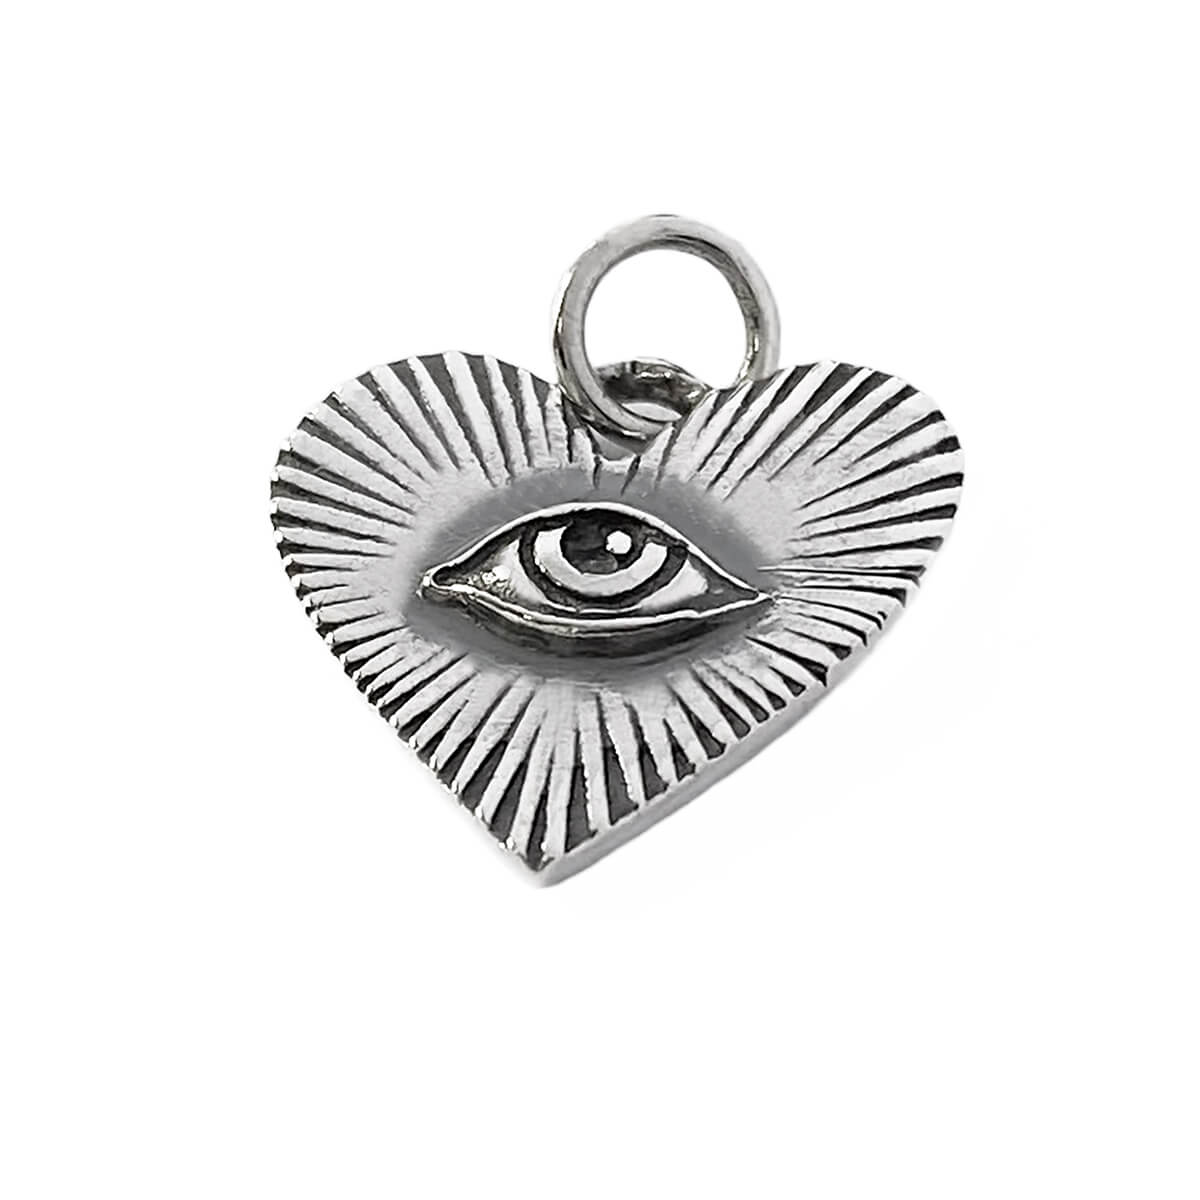 All seeing heart charm sterling silver talisman pendant from Charmarama